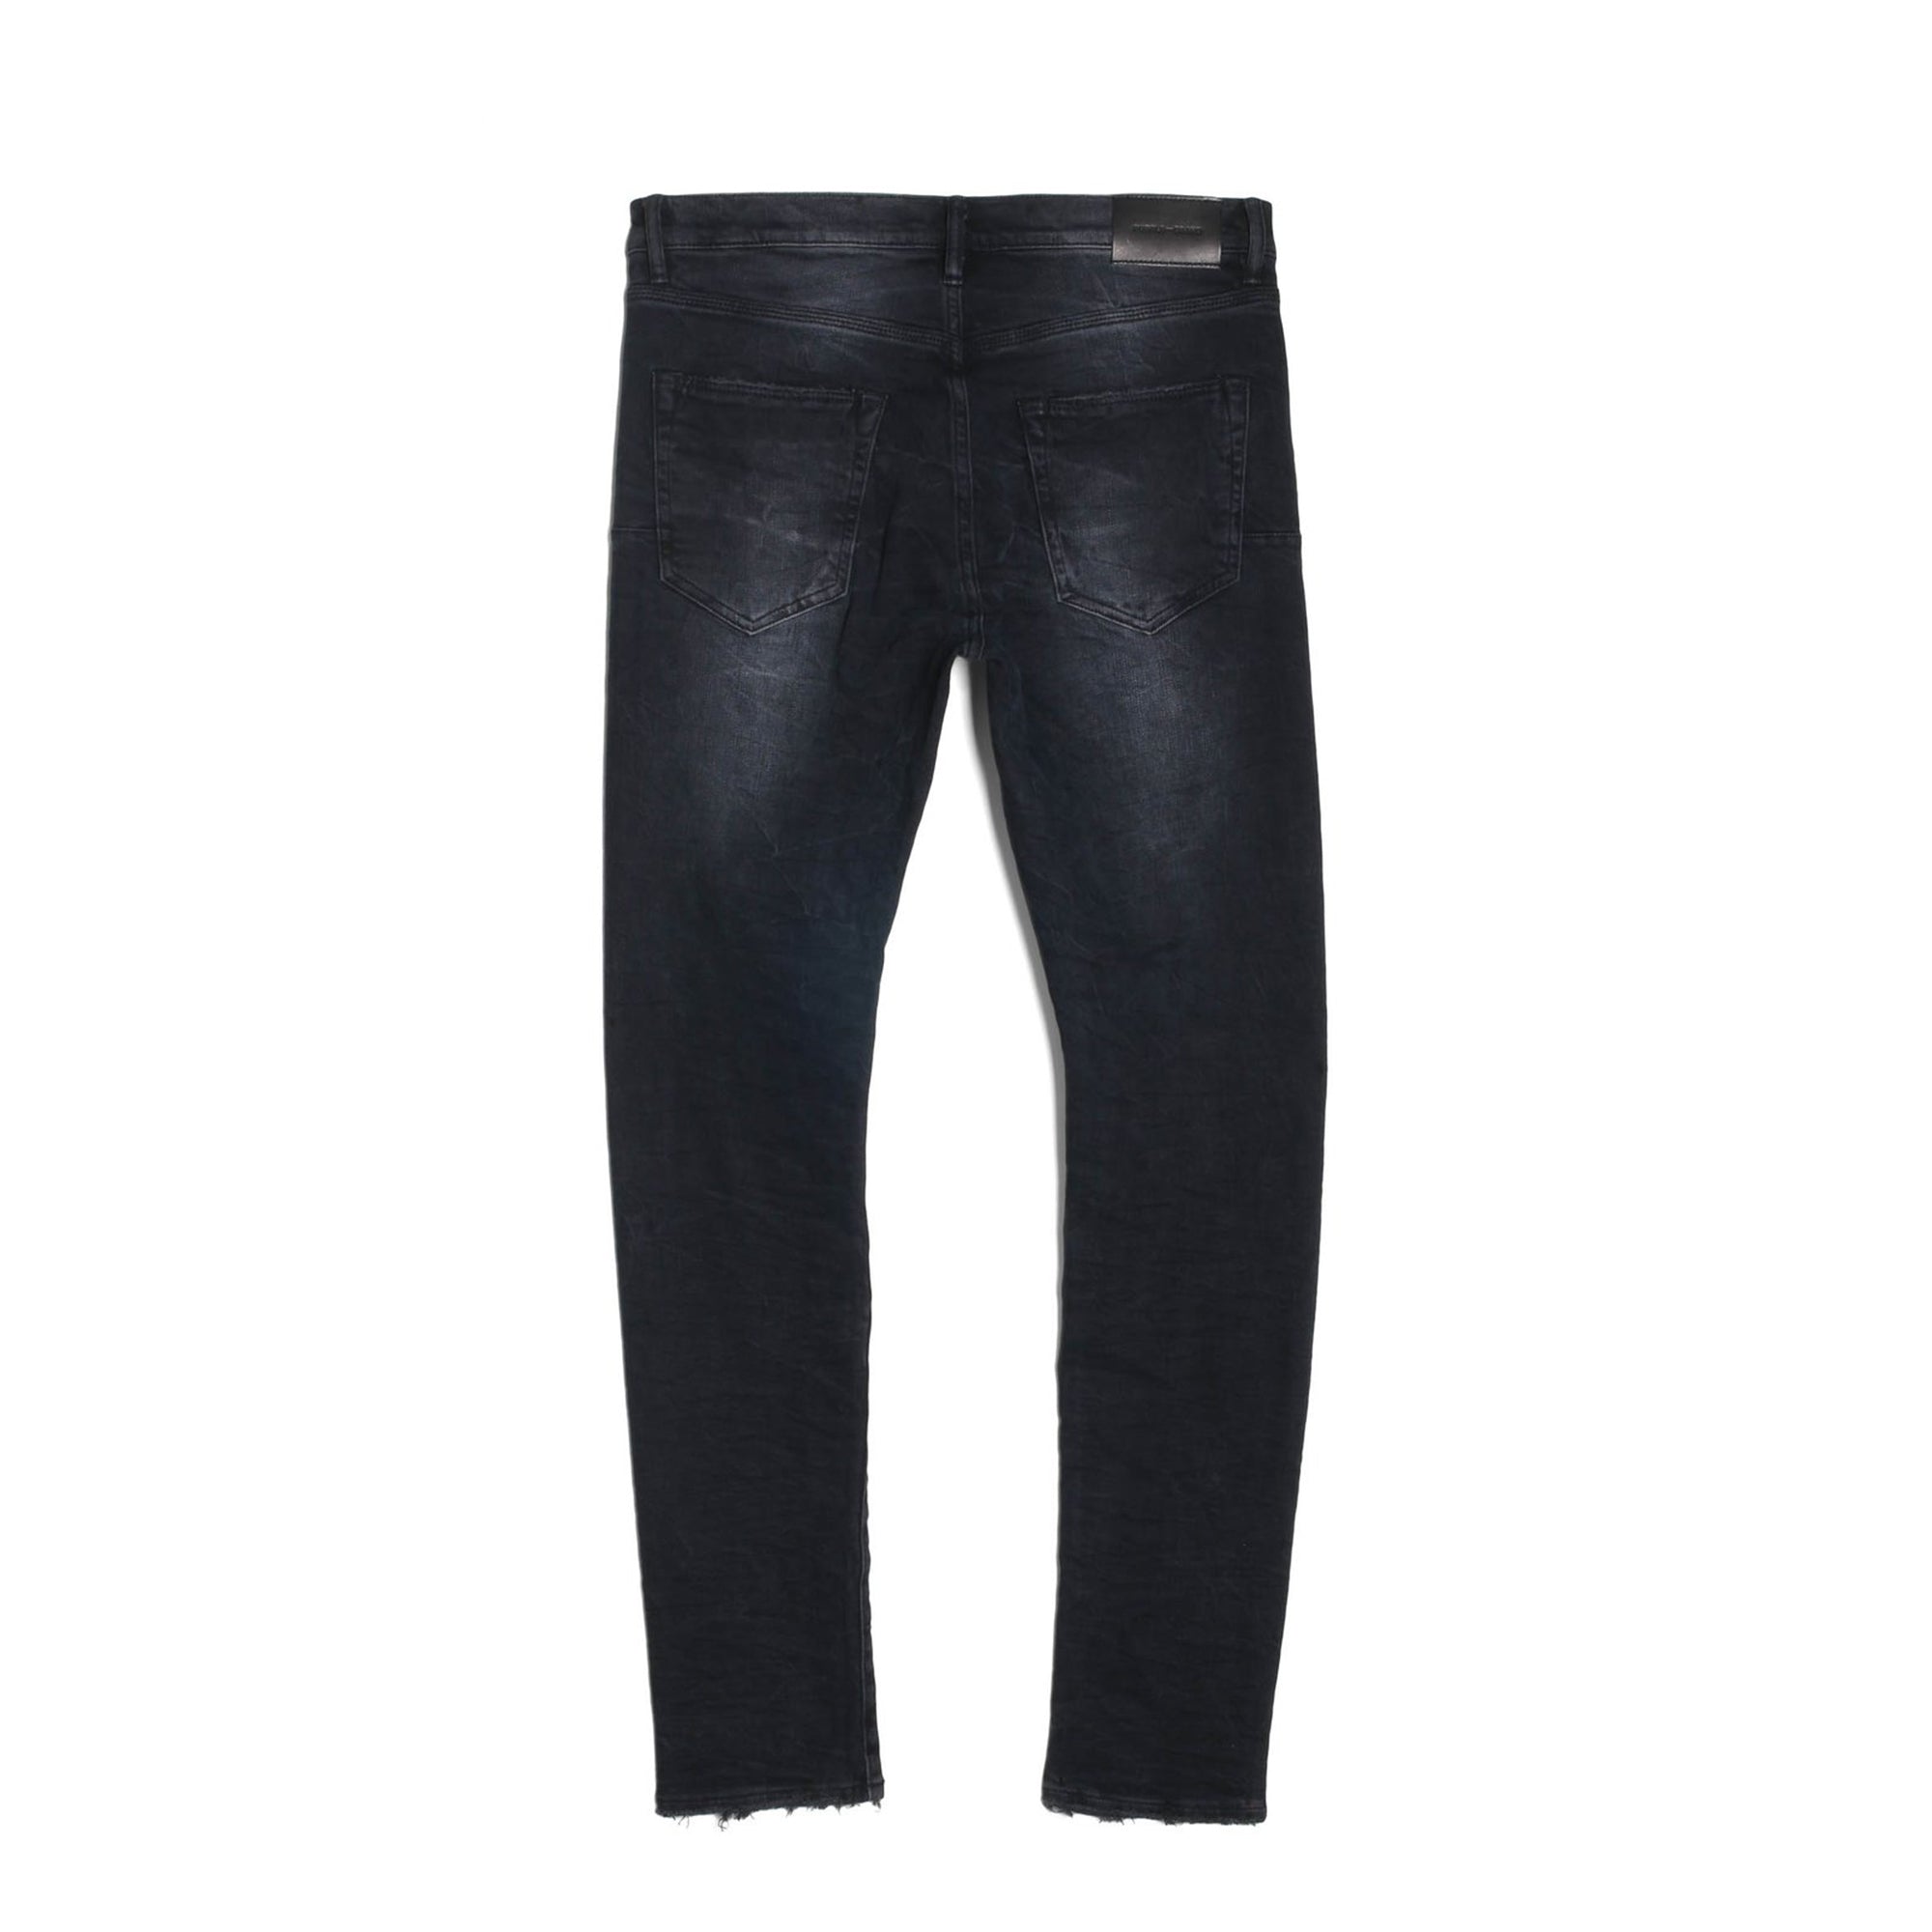 P001 LOW RISE SKINNY JEAN - Multicolor Spray Over Bleached Indigo